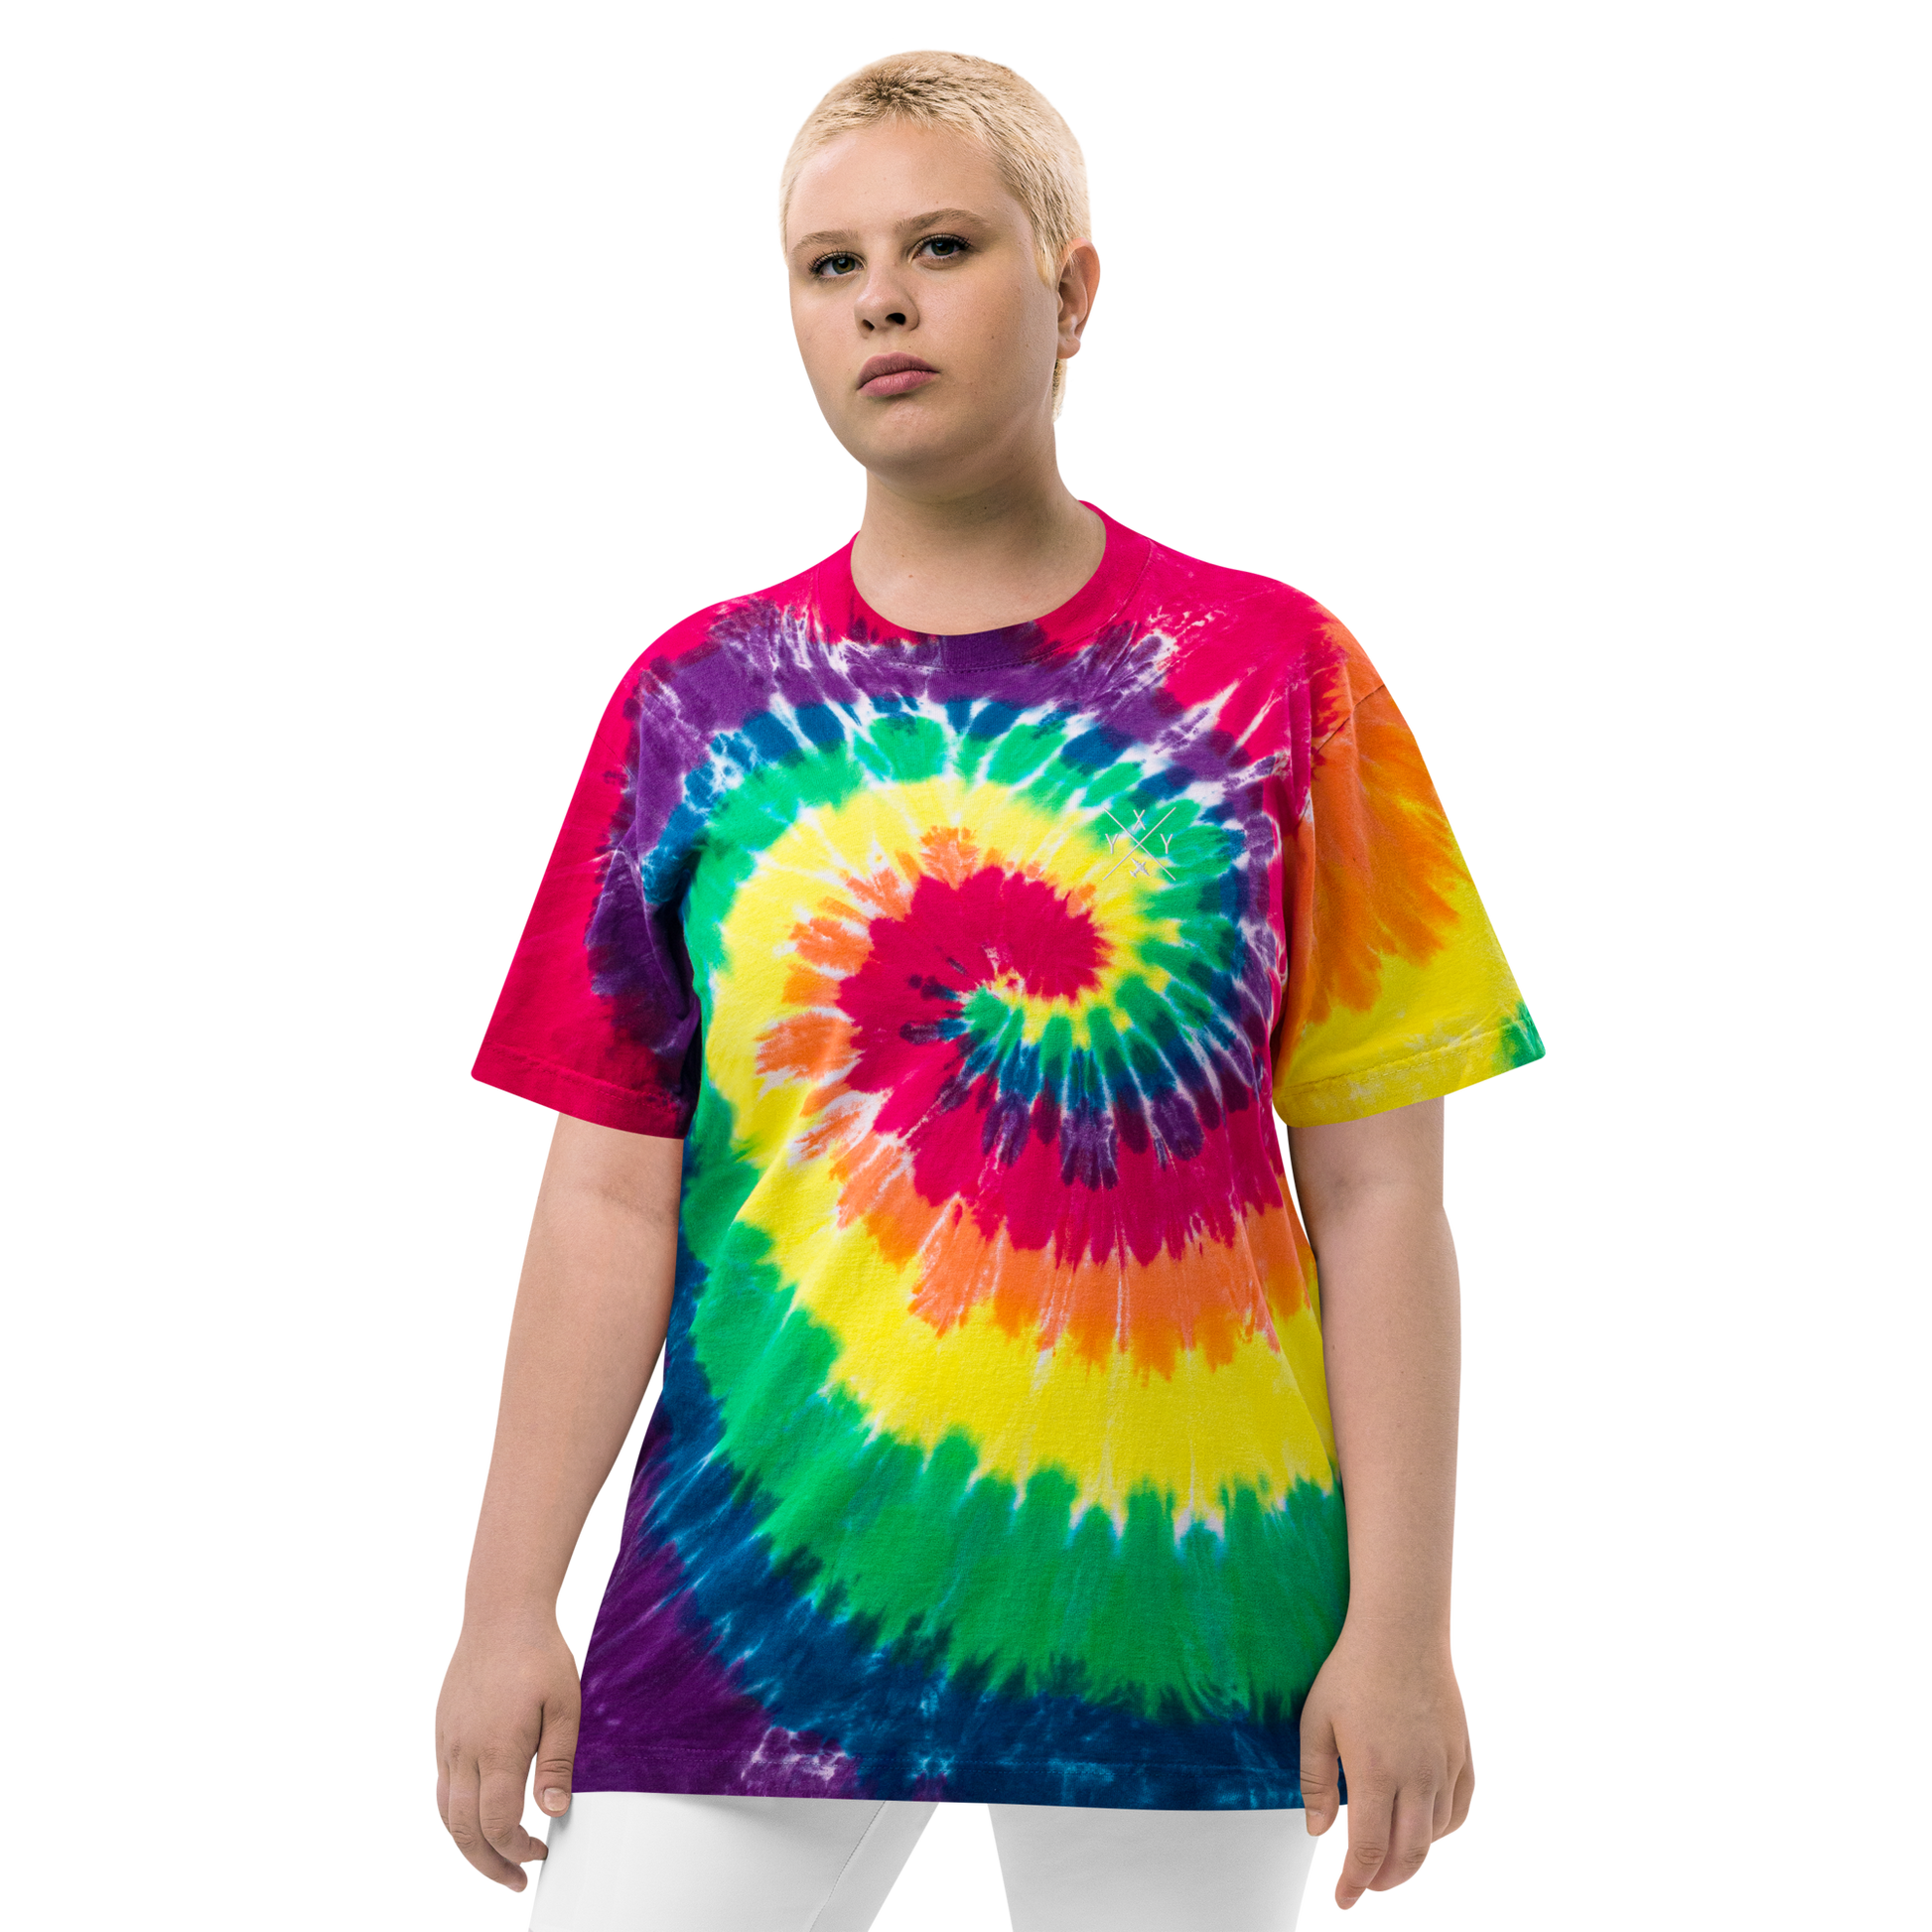 YHM Designs - YXY Whitehorse Oversized Tie-Dye T-Shirt - Crossed-X Design with Airport Code and Vintage Propliner - White Embroidery - Image 01